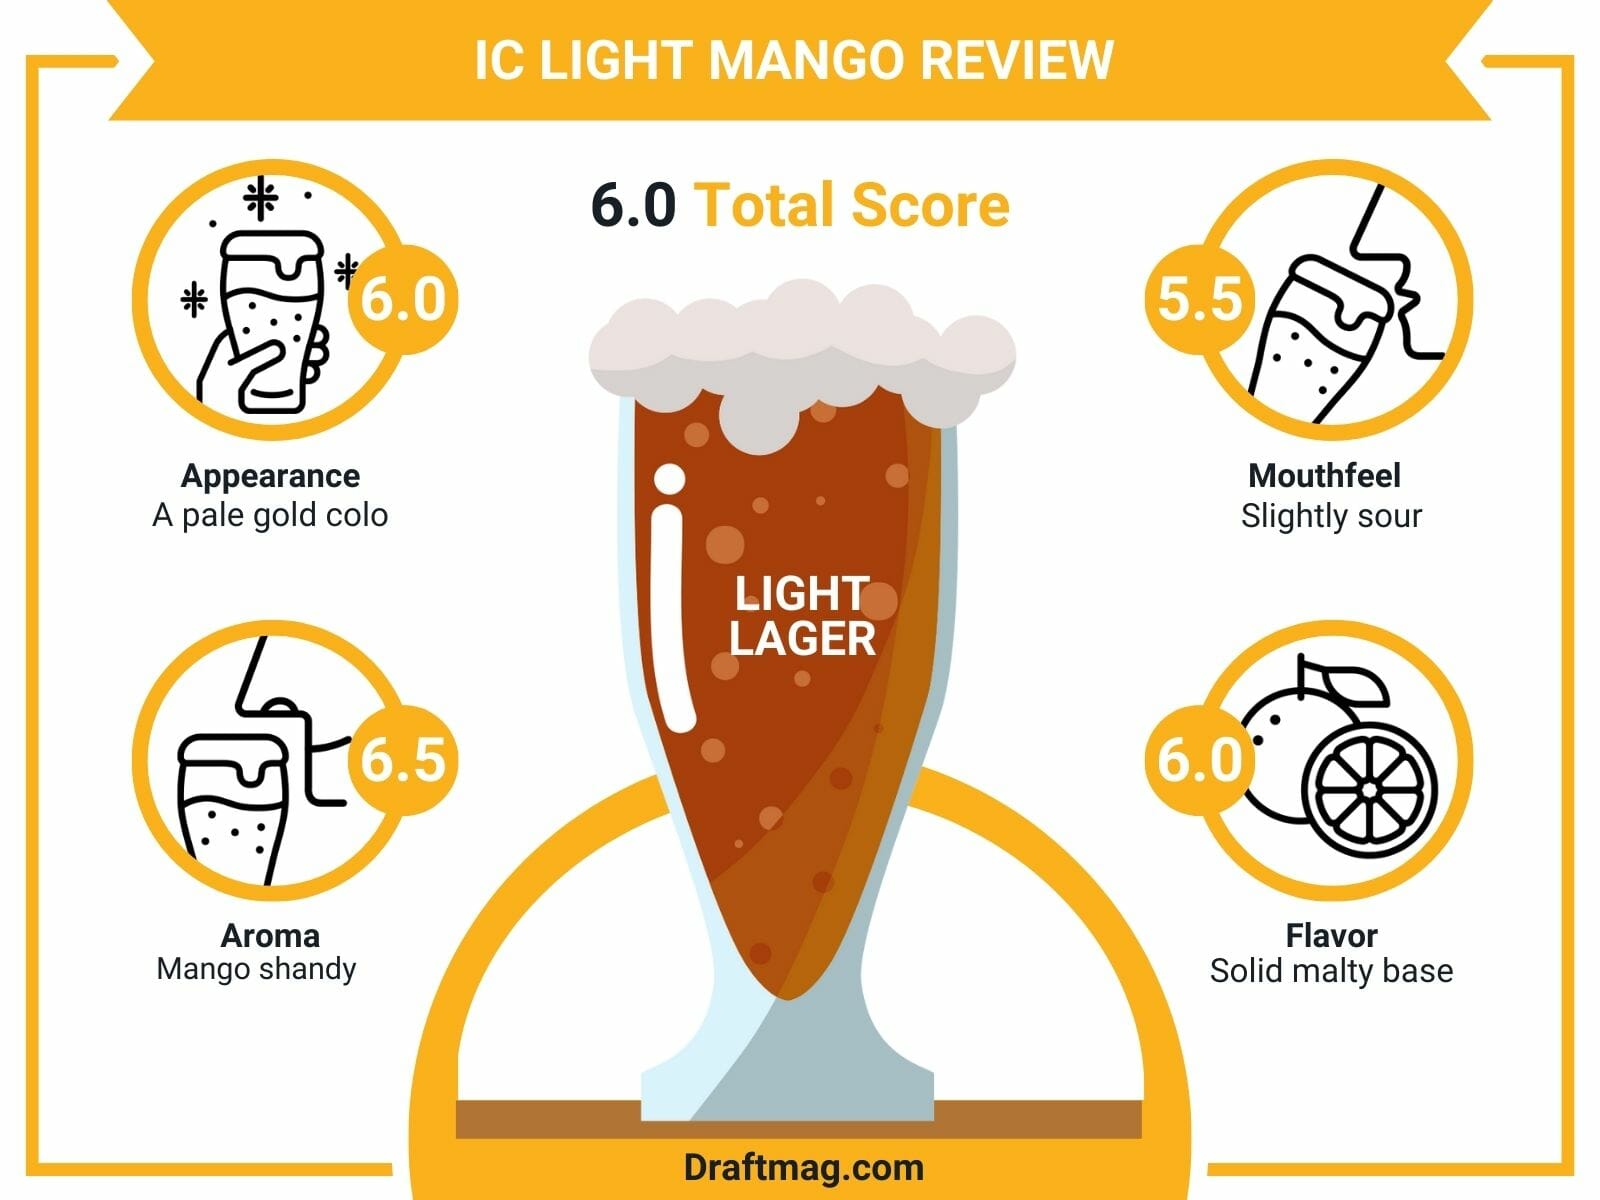 IC Light Mango Review Infographic